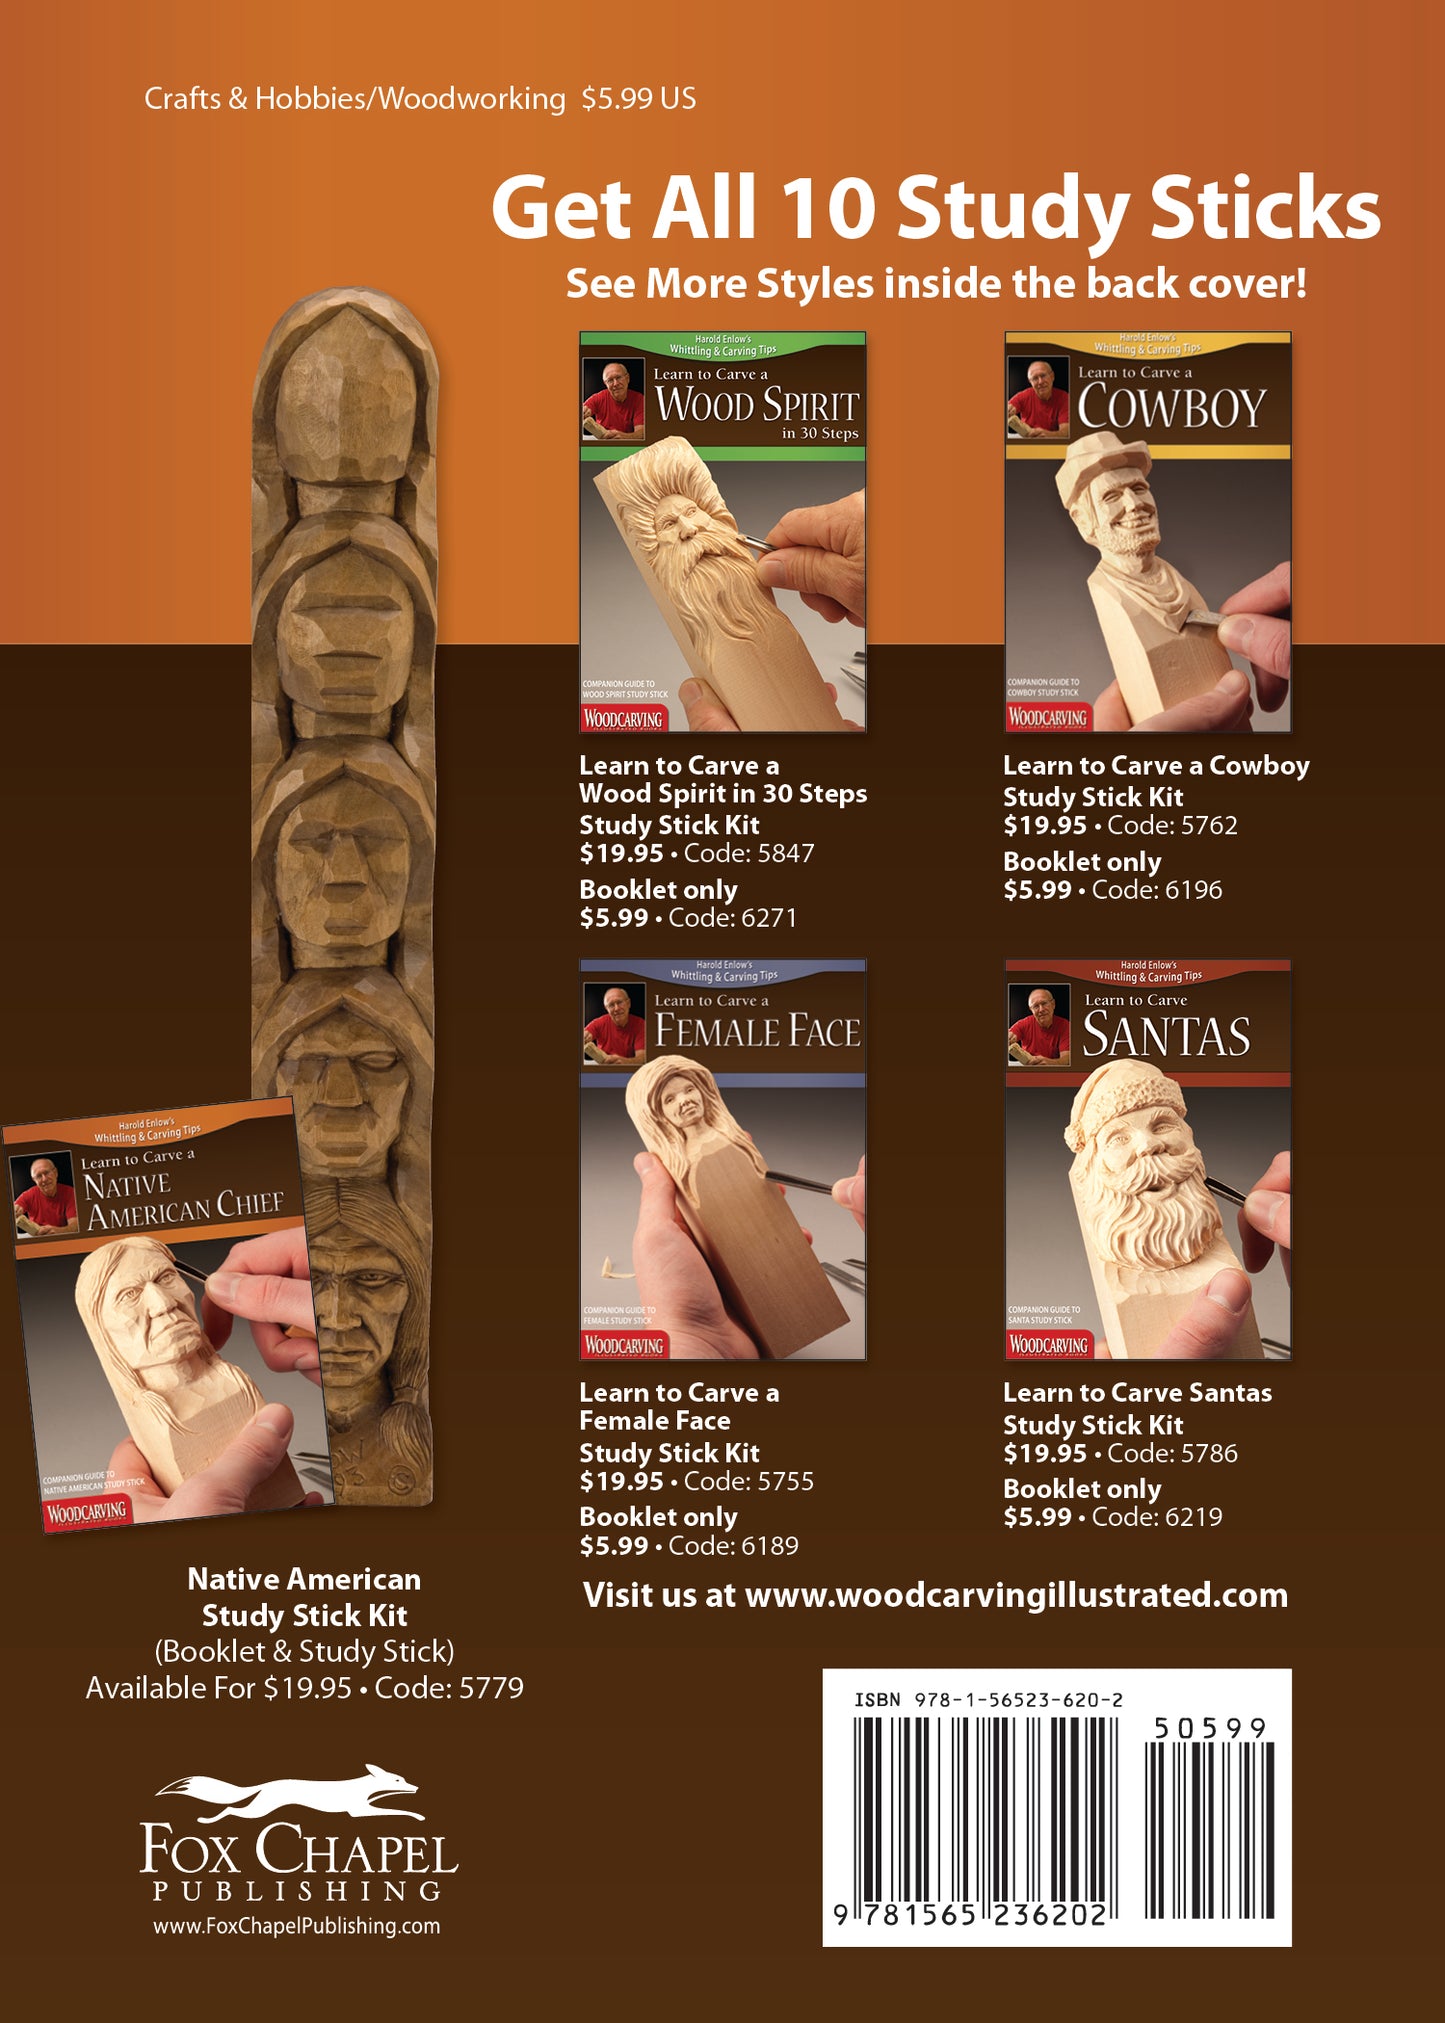 Learn to Carve a Native American Chief (Booklet)